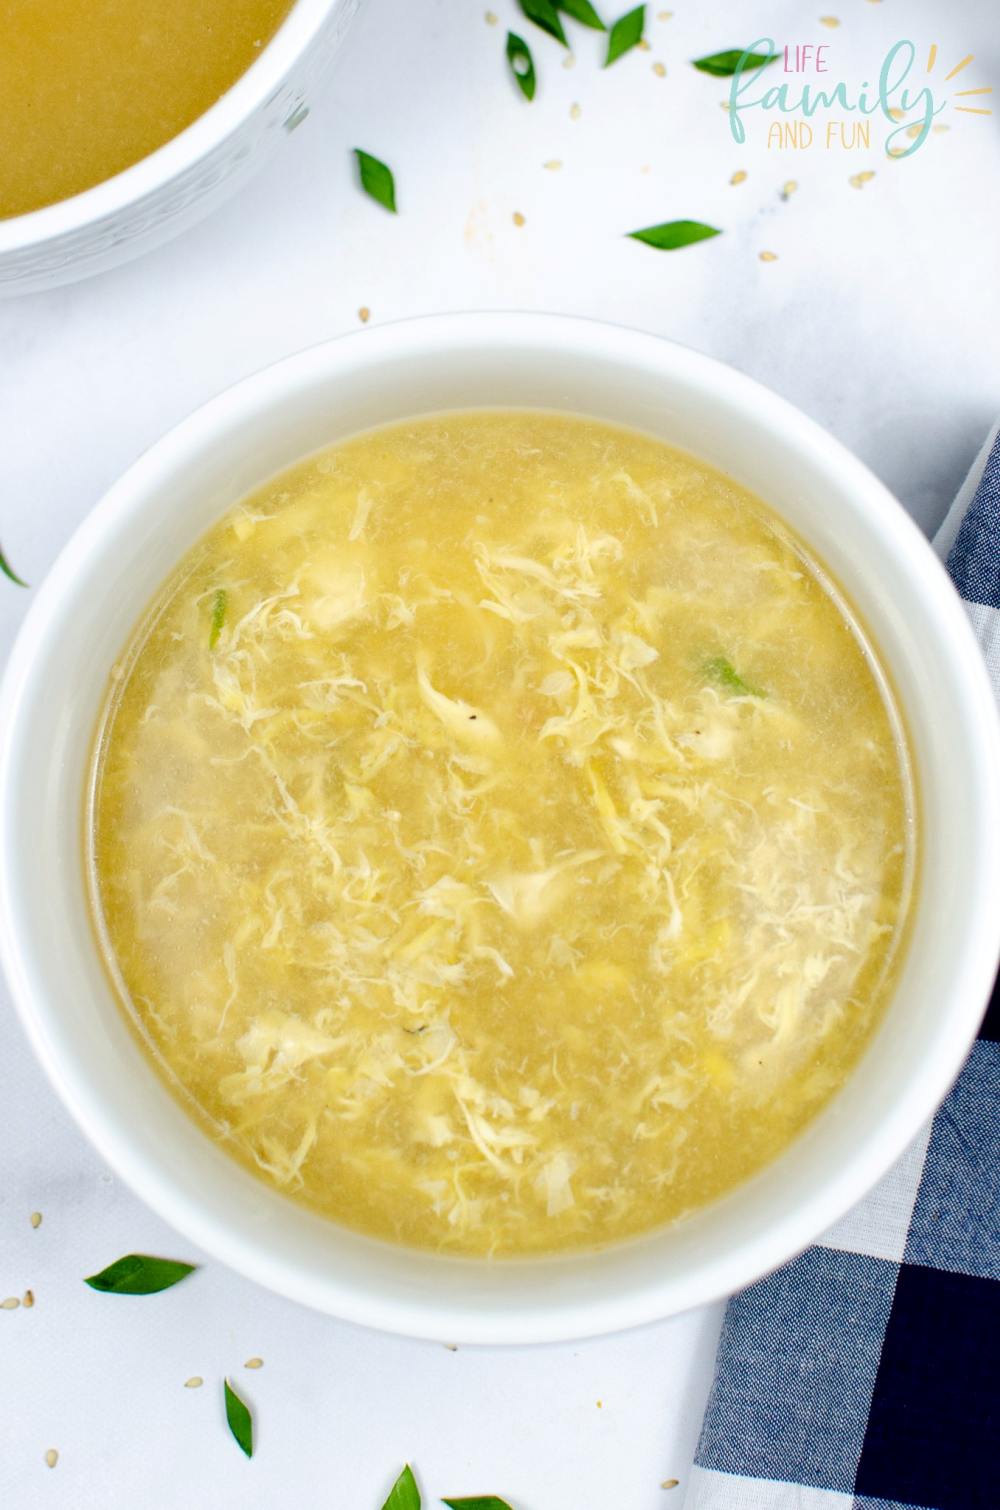 Instant Pot Egg Drop Soup Recipe - what and how to prepare